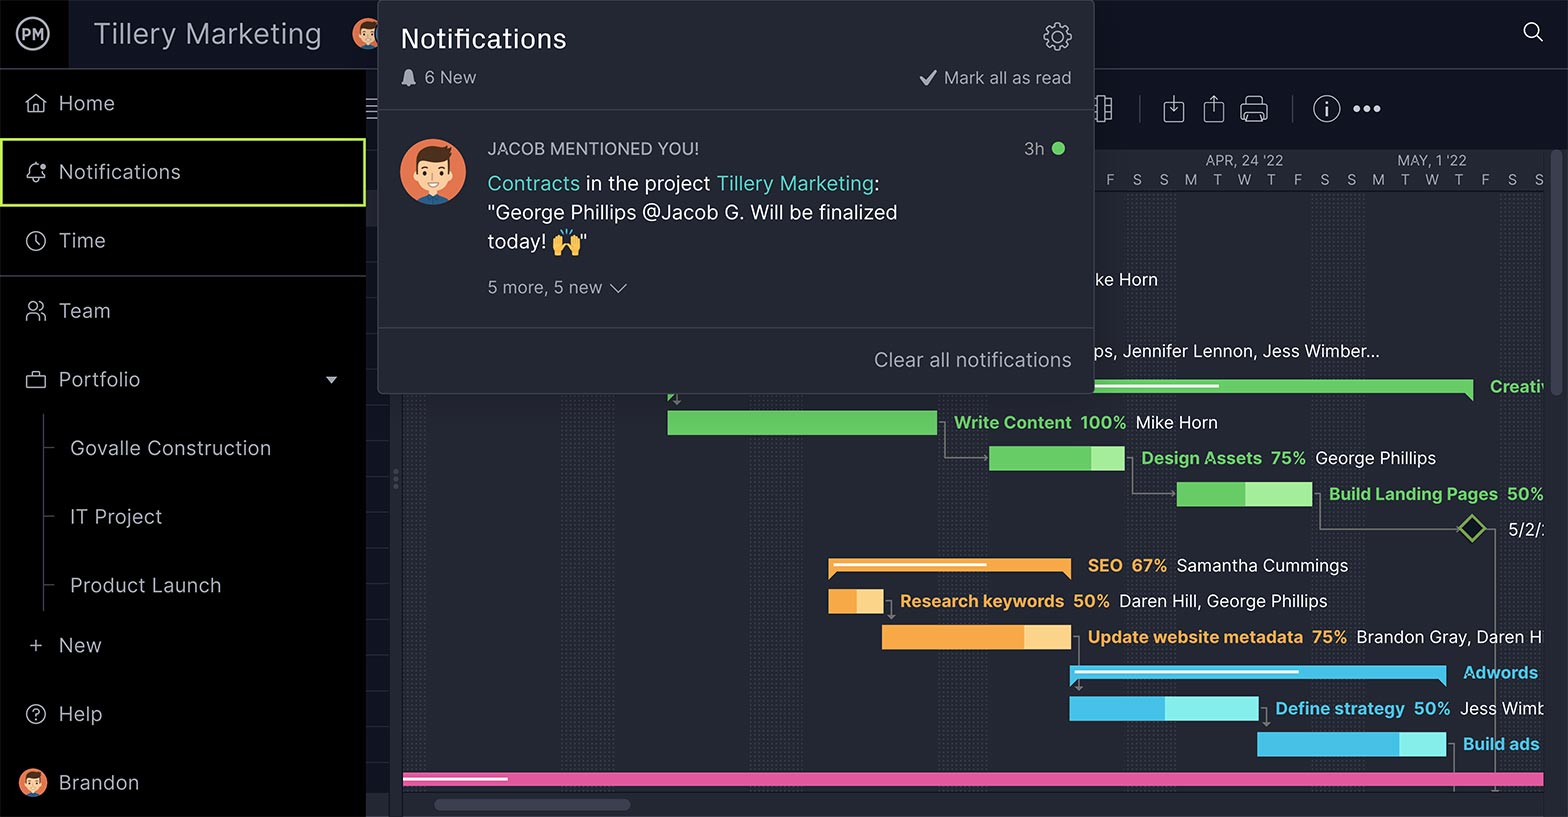 ProjectManager's is a project collaboration software with real-time notifications